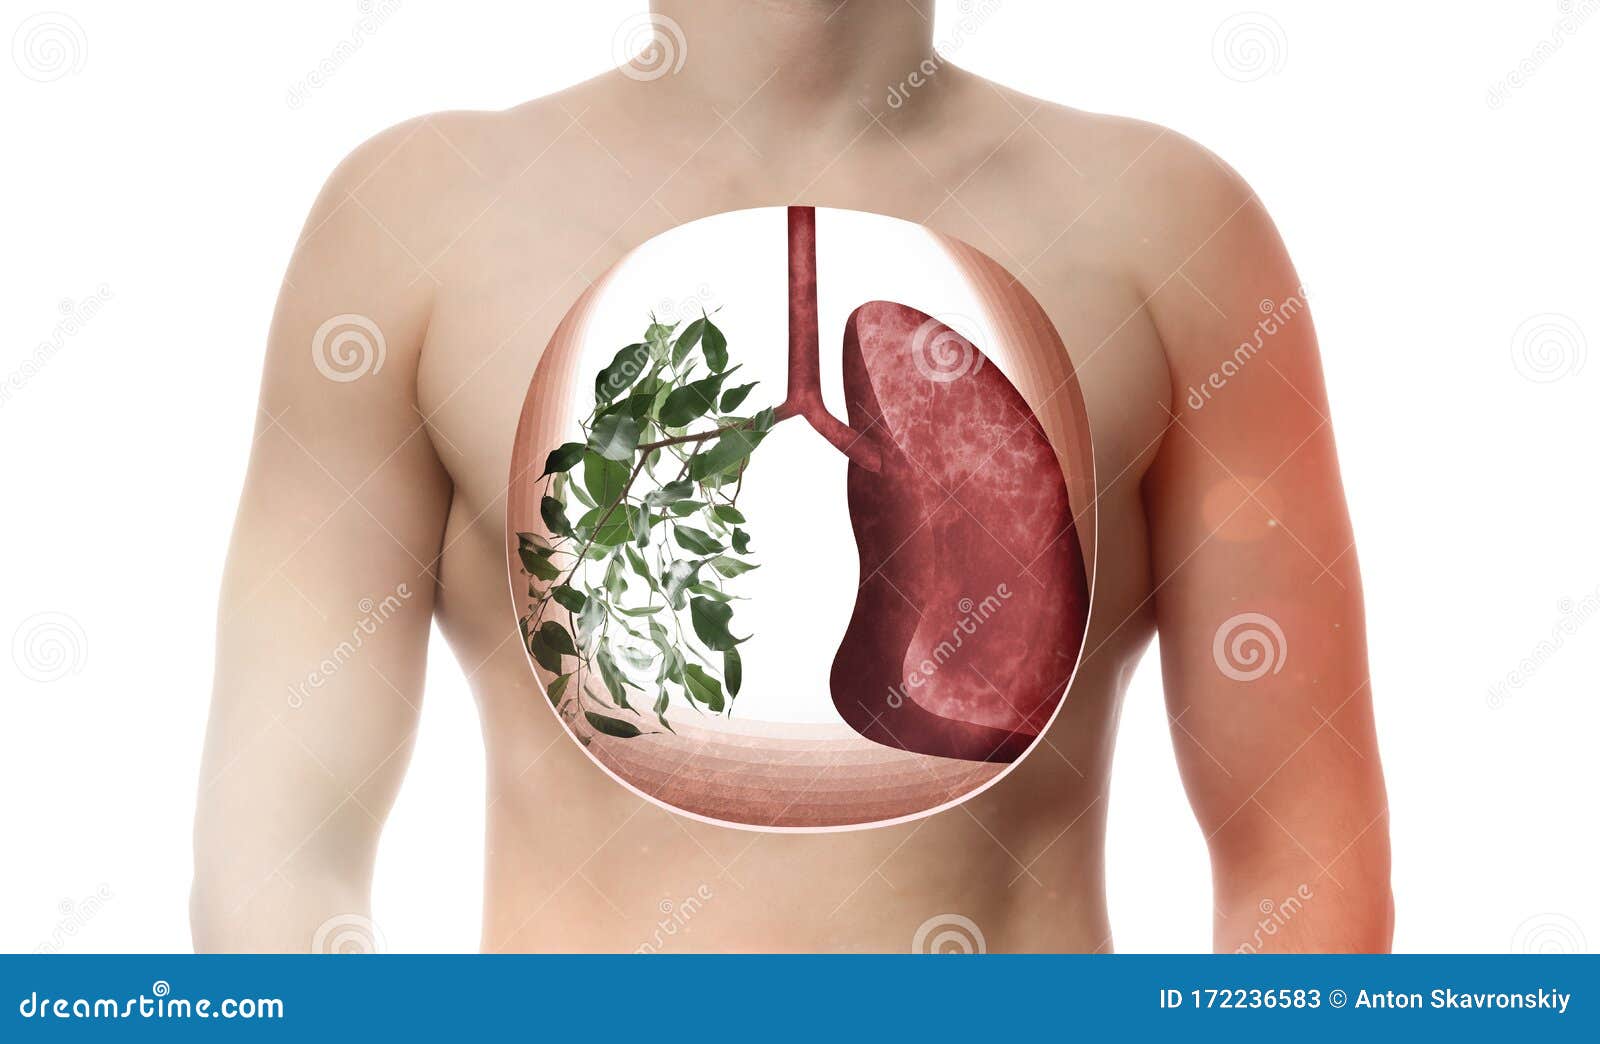 one lung consists of green leaves as metaphor healthy respiratory system